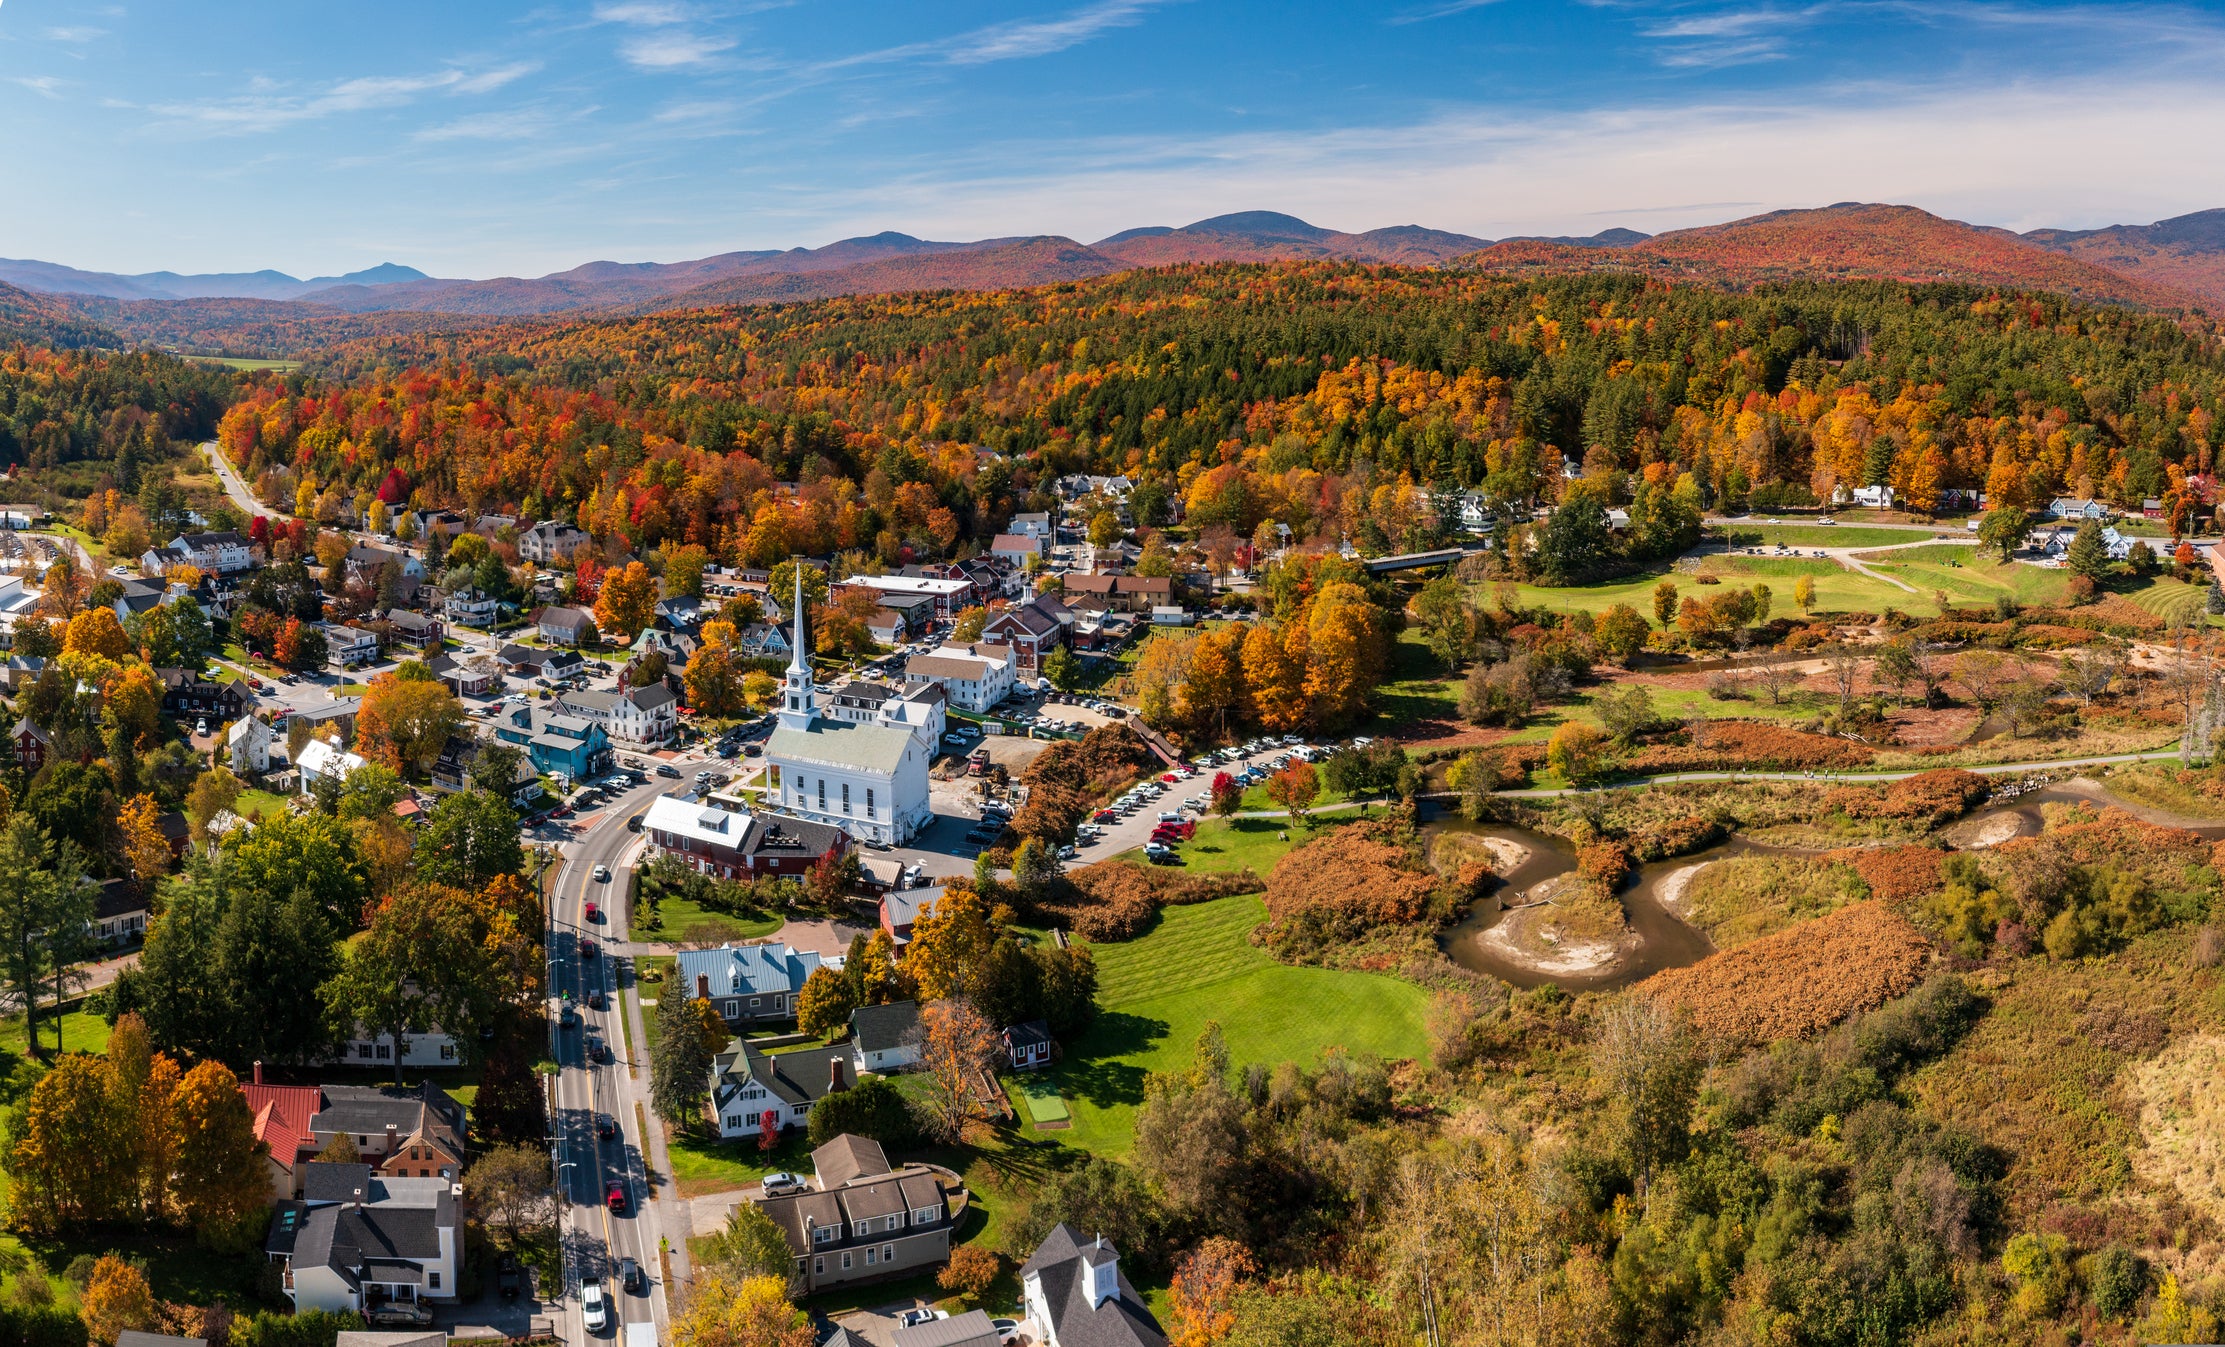 House prices in Vermont rose the highest last year, with a 12.8 percent jump - nearly double the national average